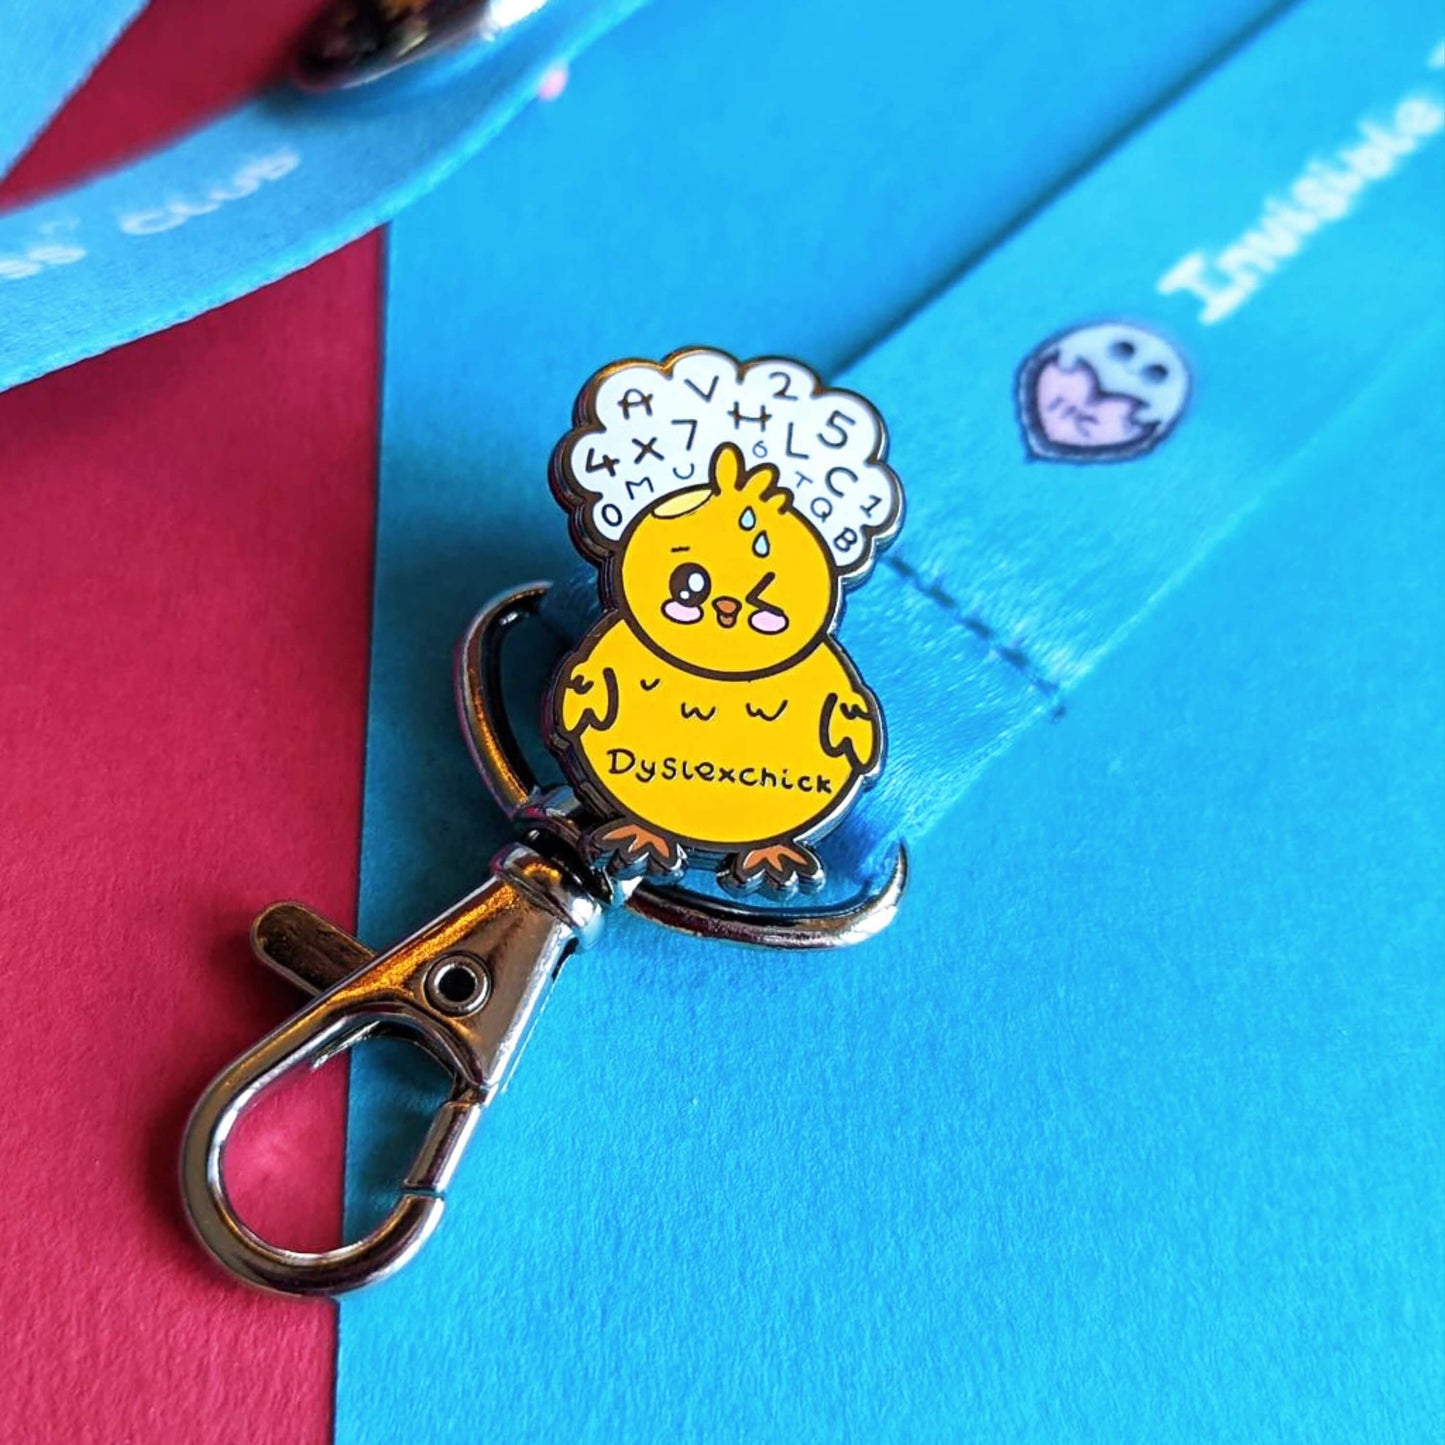 The Dyslexchick Enamel Pin - Dyslexia pinned to an innabox invisible illness blue lanyard with silver lobster clip on a red and blue background. A yellow confused chick shaped pin badge with a thought bubble above its head full of letters and numbers with 'dyslexchick' written across its middle. The hand drawn design is raising awareness for dyslexia.